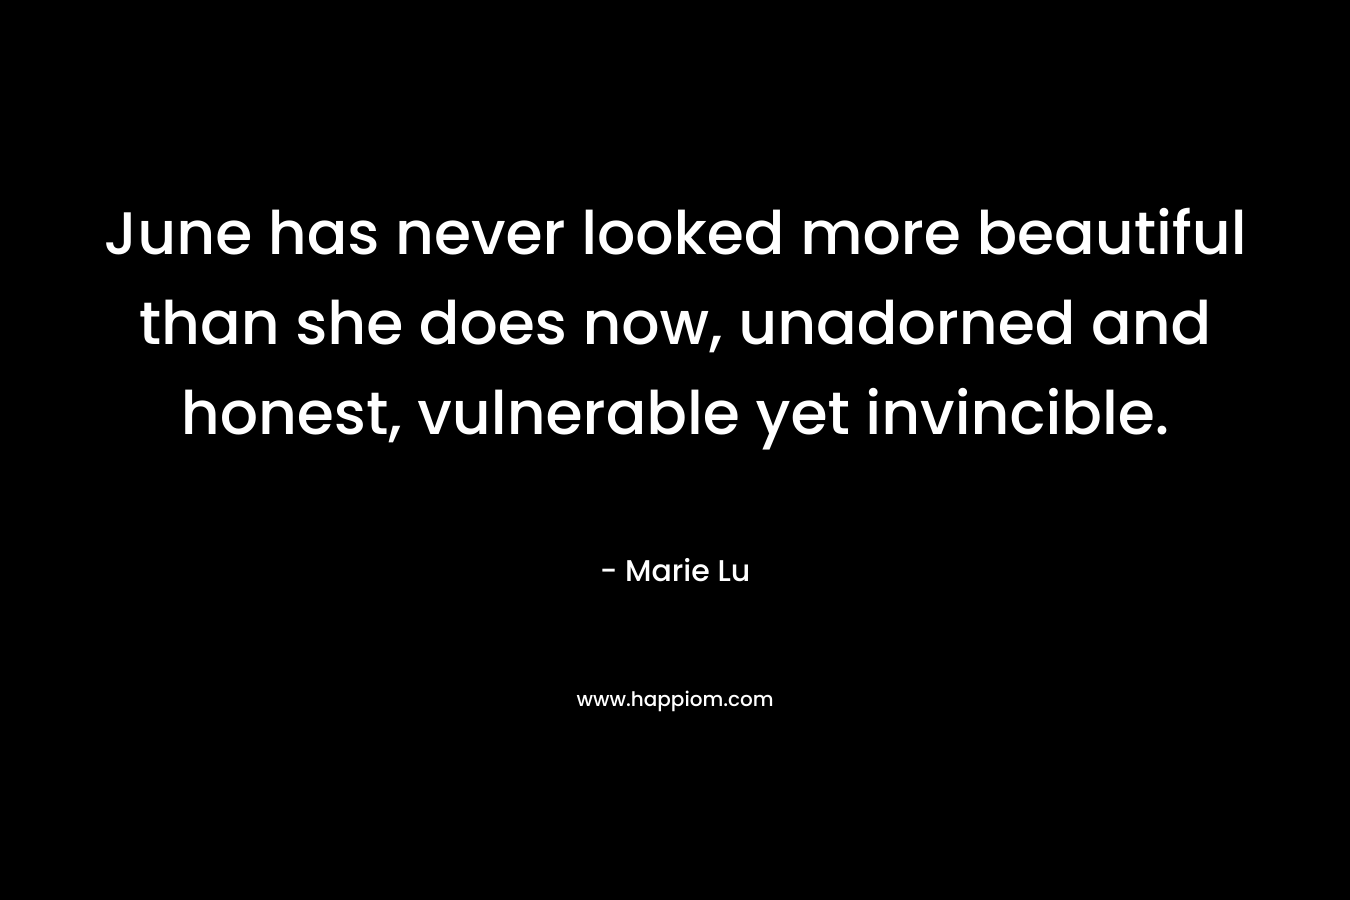 June has never looked more beautiful than she does now, unadorned and honest, vulnerable yet invincible. – Marie Lu